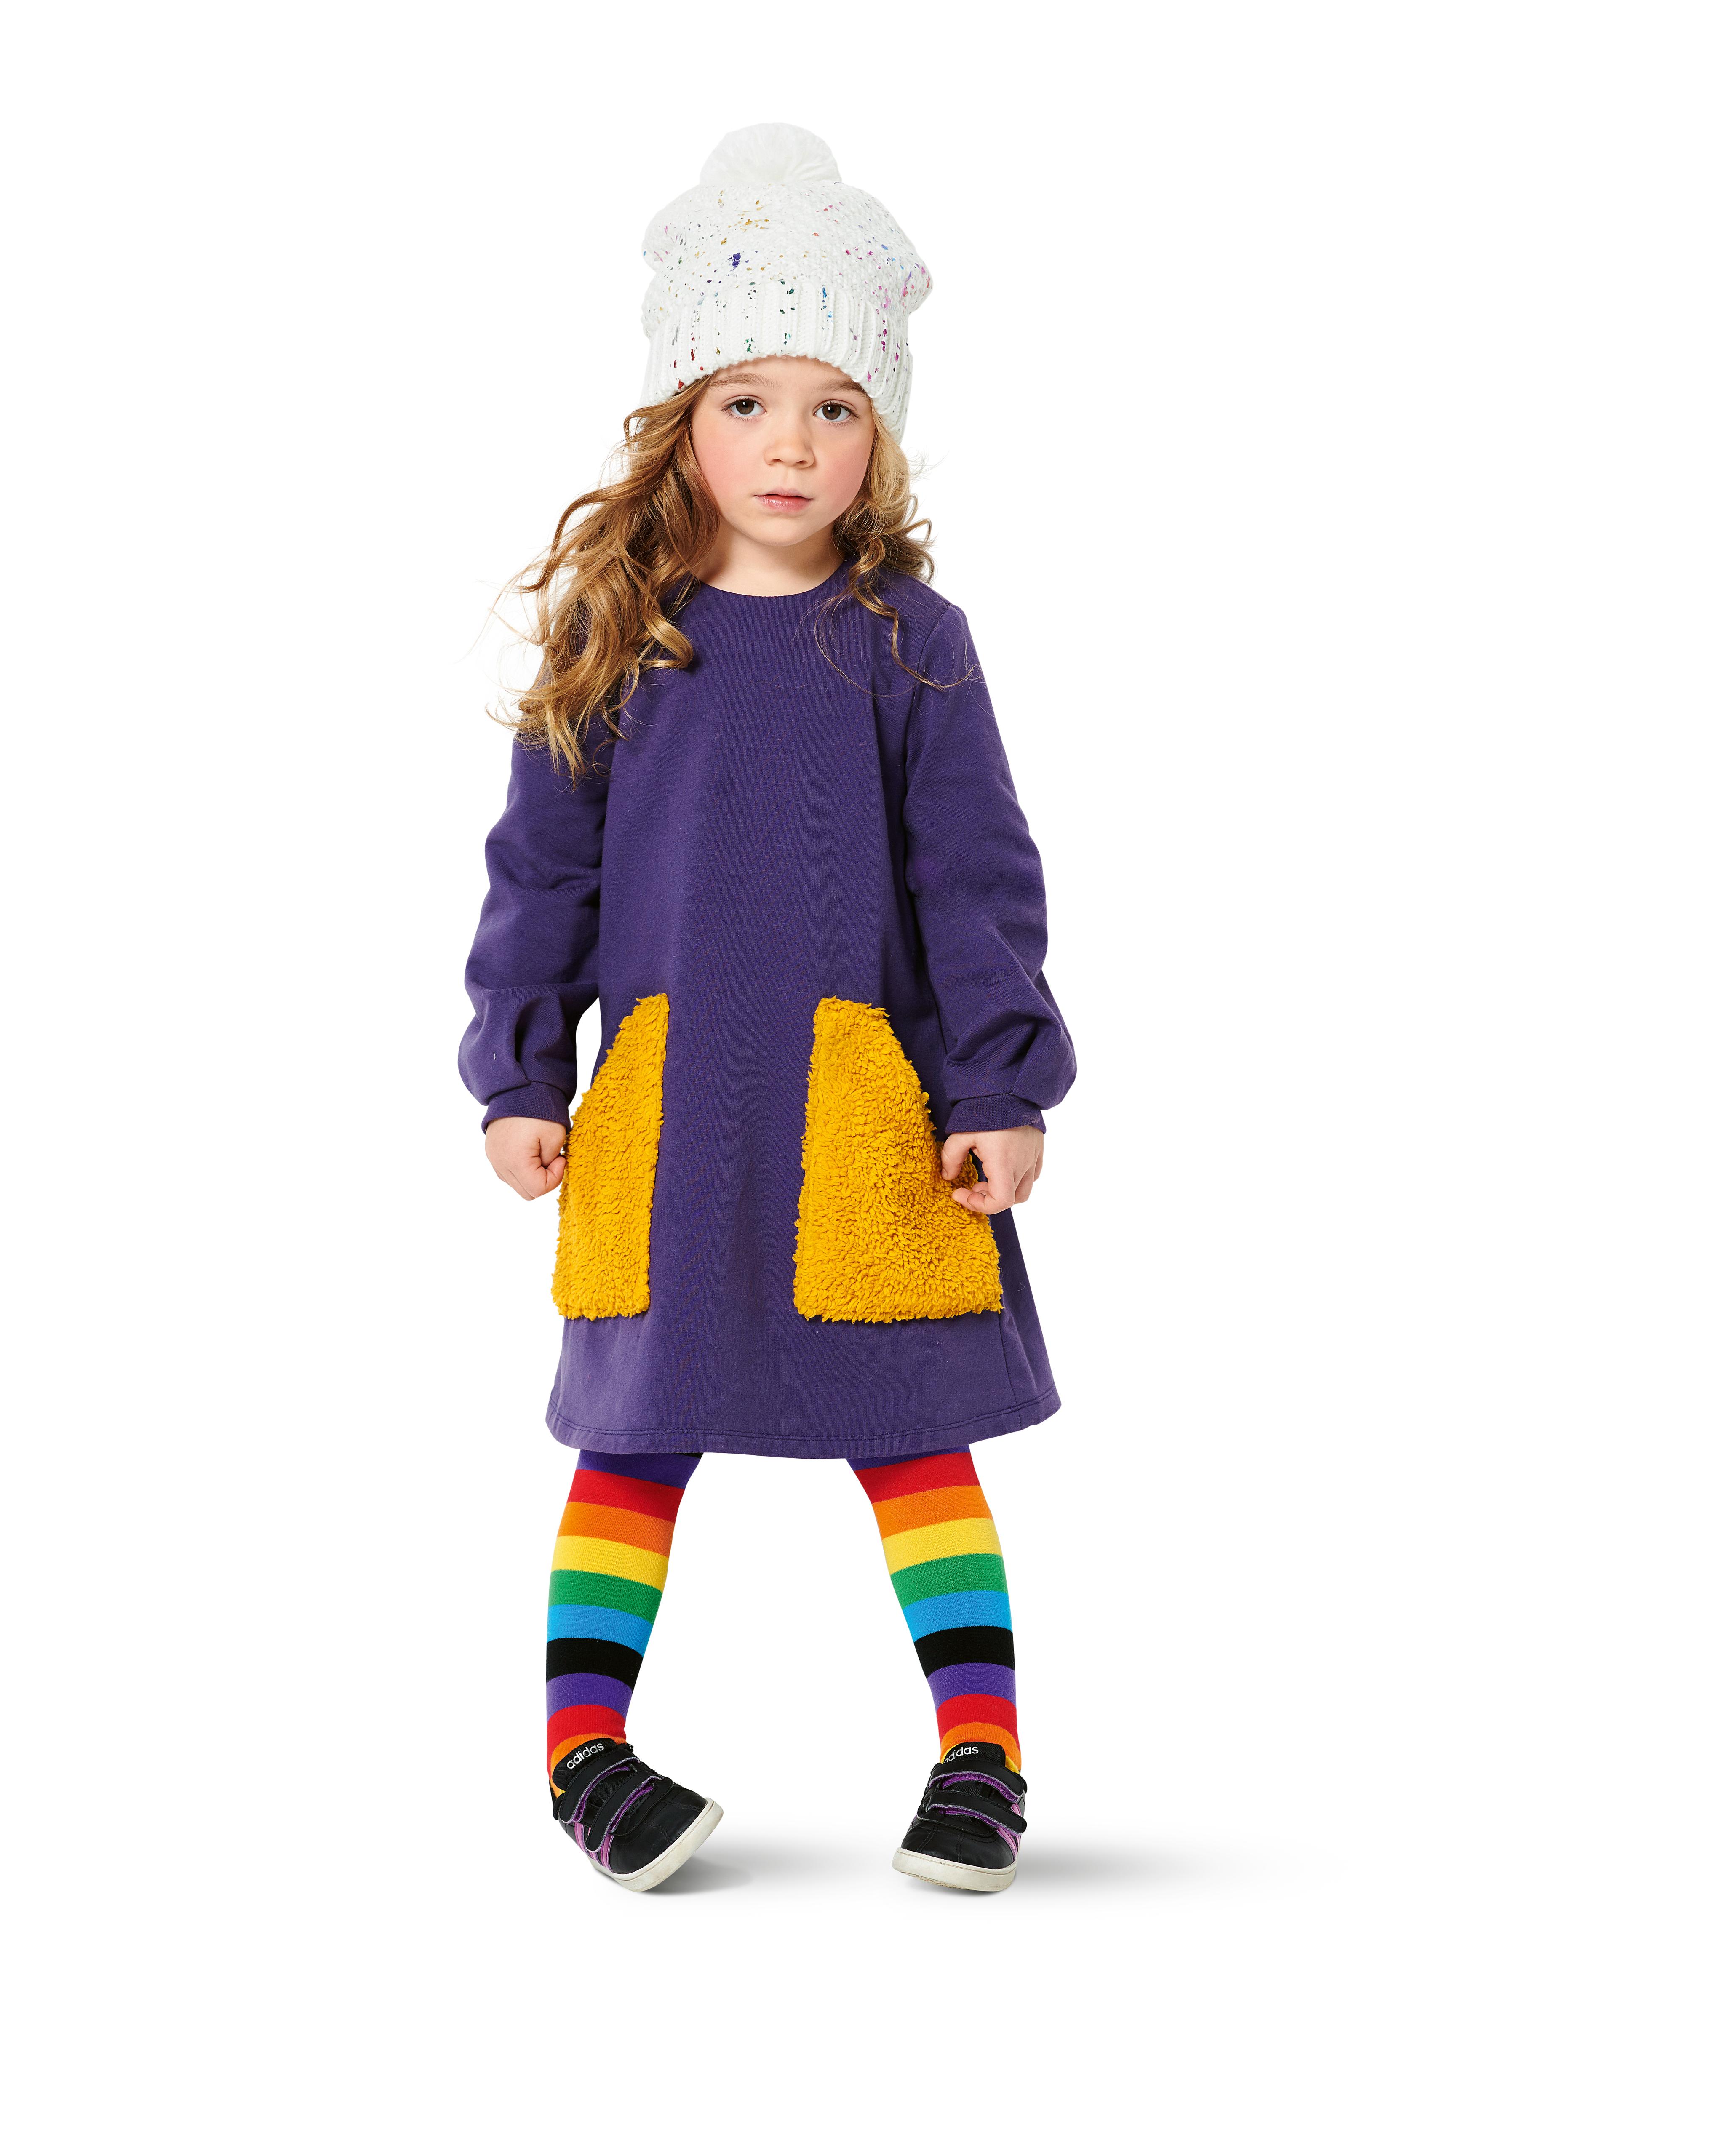 Burda 9310 Children's Dress, Pull-On with Partially Pleated Skirt or Feature Pockets